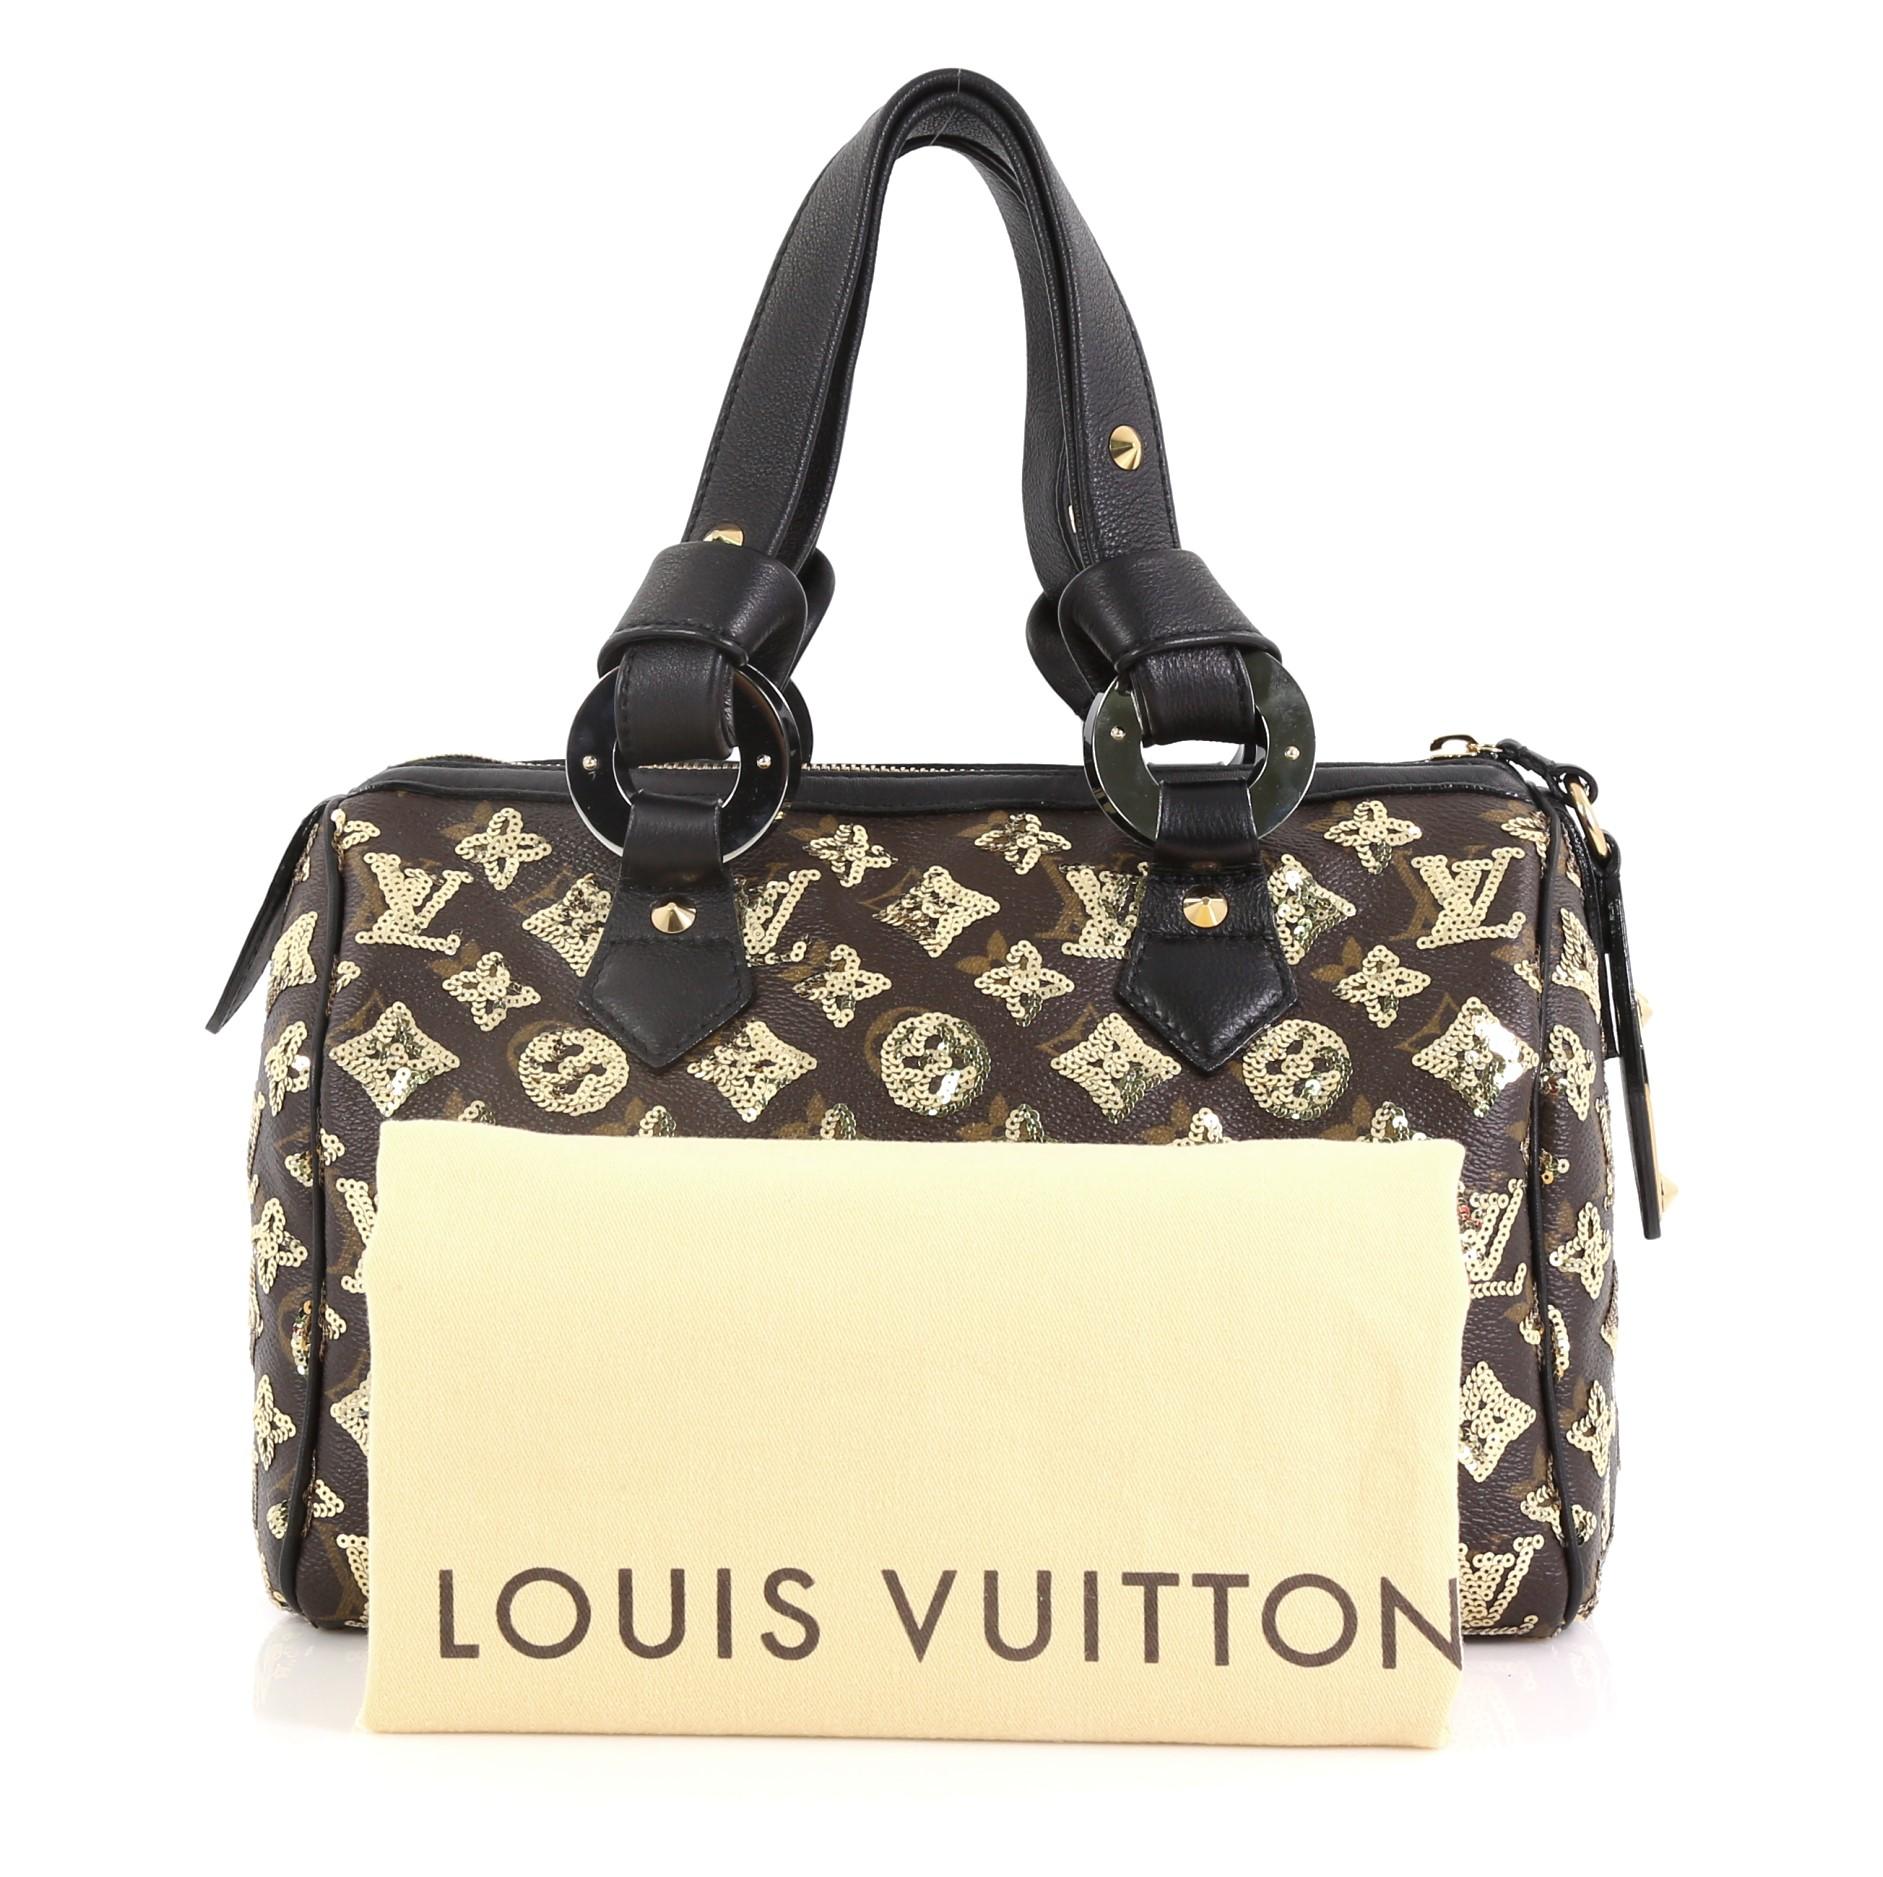 This Louis Vuitton Speedy Handbag Limited Edition Monogram Eclipse Sequins 28, crafted from brown monogram eclipse sequins, features leather handles with end knots, graphic eyelet accents, and gold-tone hardware. Its zip closure opens to a black